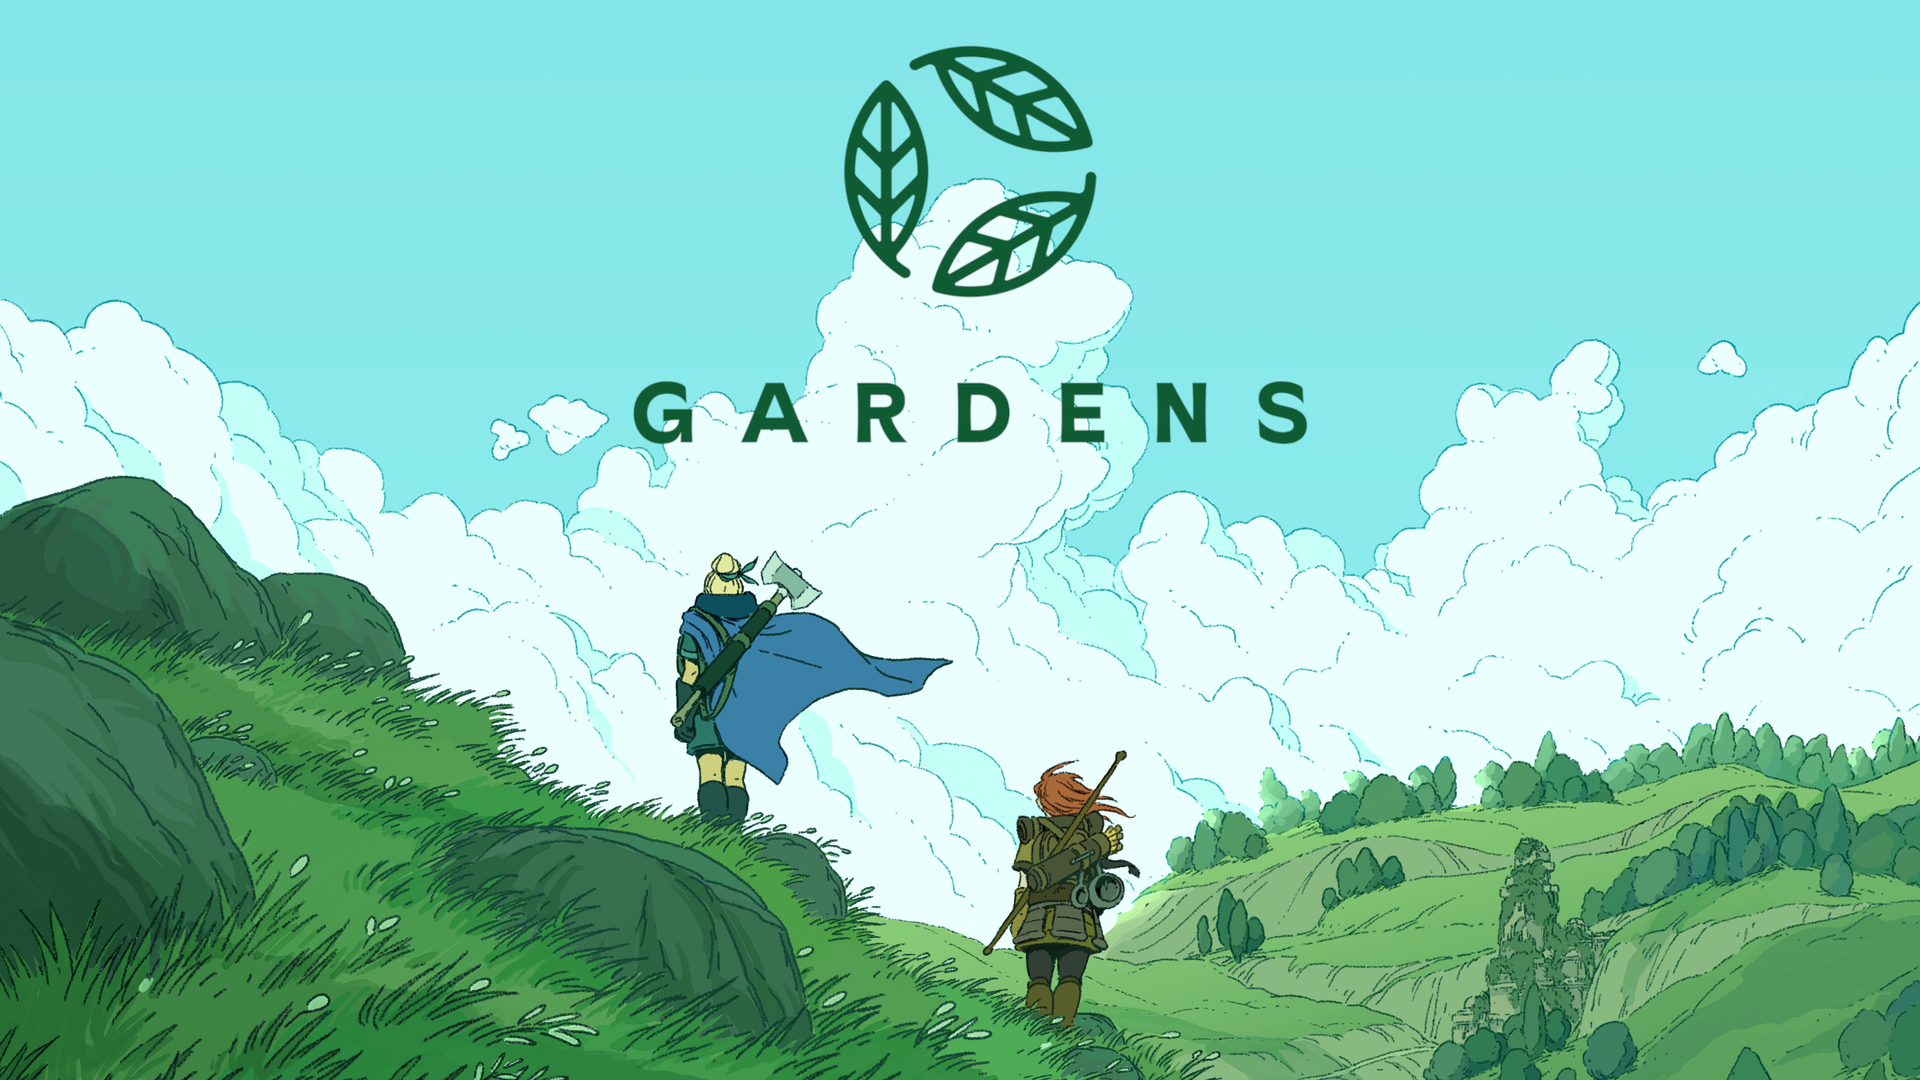 Still from an upcoming game by Gardens of two people, one with an axe and the other with a staff, standing in a green field. The Gardens logo, three leaves in a circle, is in the sky